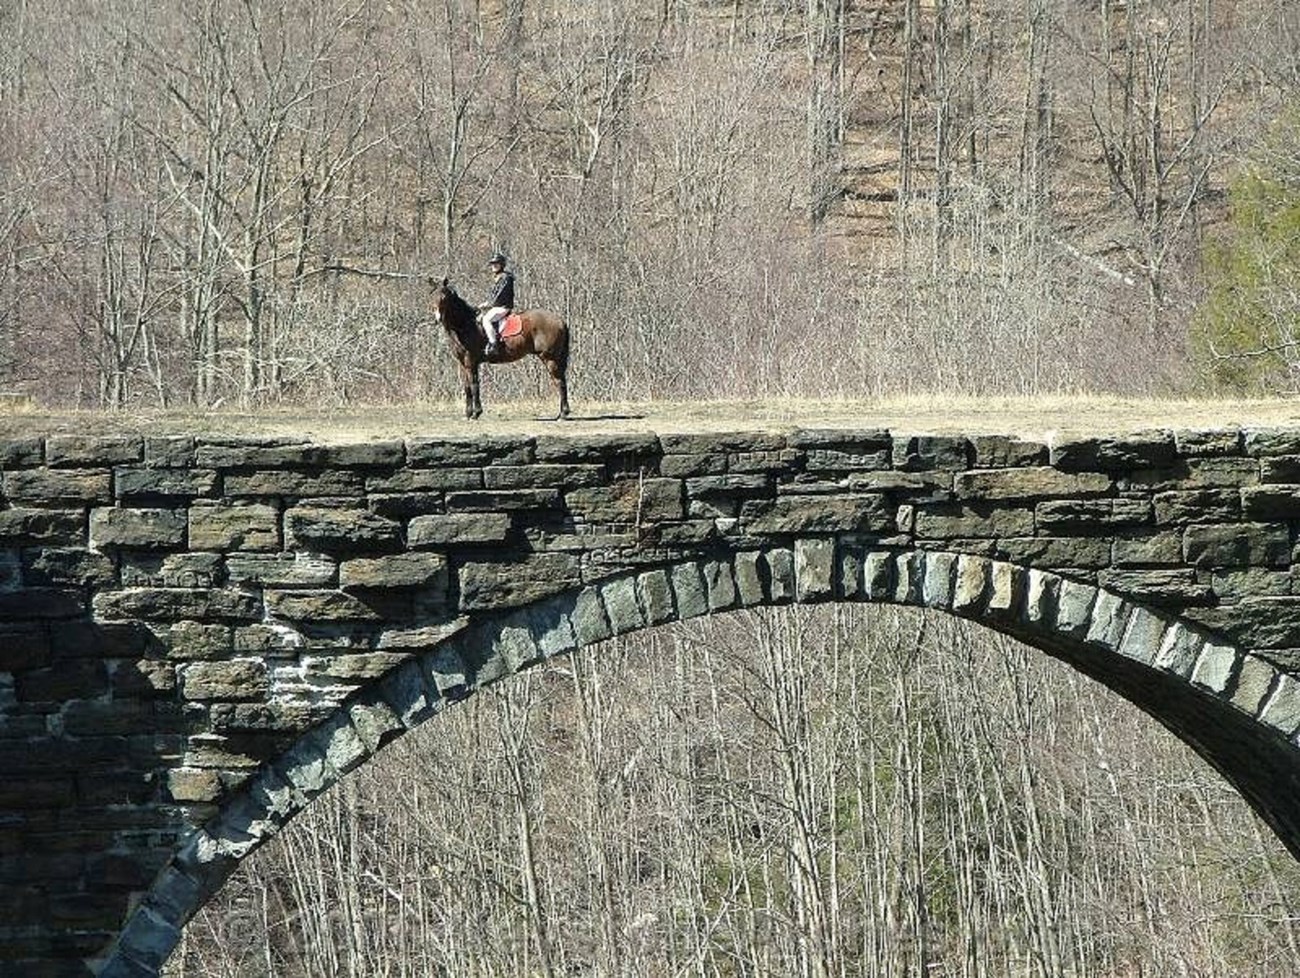 Sonia and her horse, LT, enjoying the great outdoors while getting out on the Keystone Arch Bridges trails. Photo Credit: Keystone Arches website.